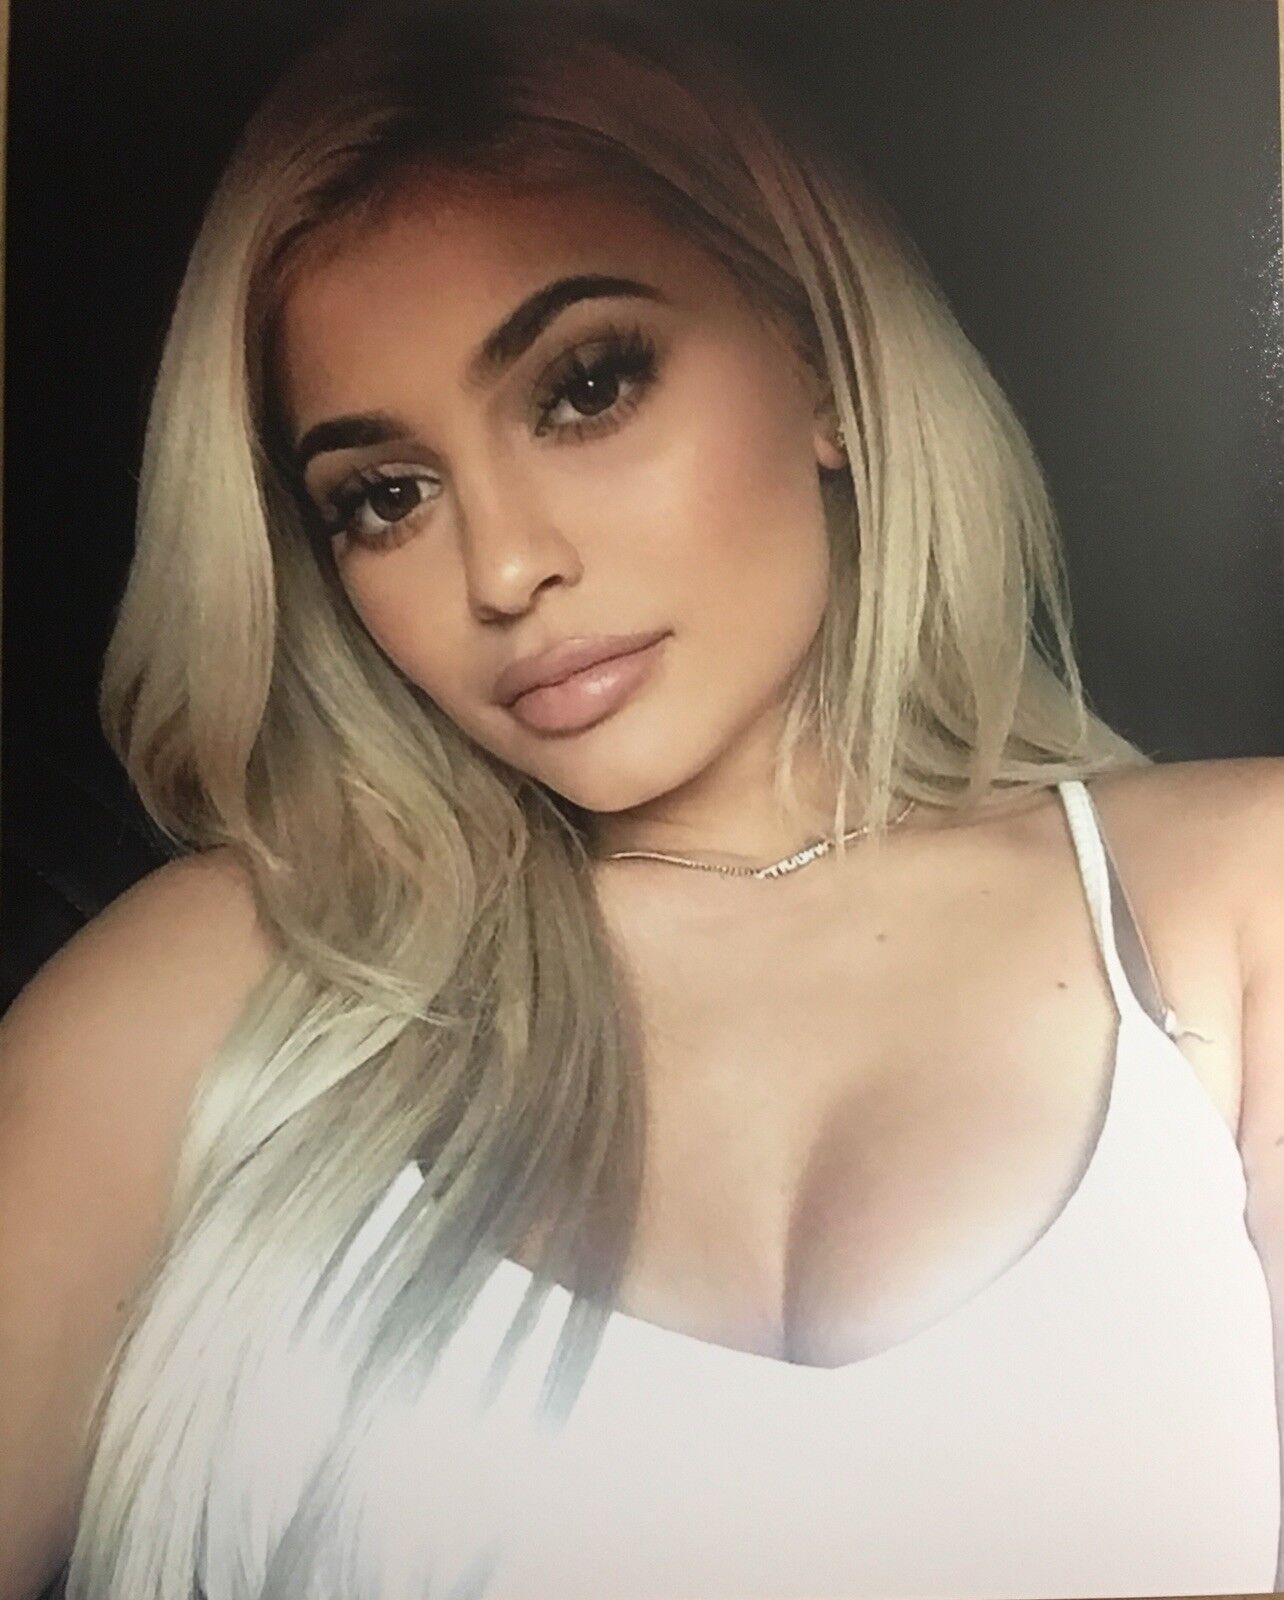 Kylie Jenner 8x10 Sexy Photo Poster painting Print Kardashian Picture KYLIE JENNER